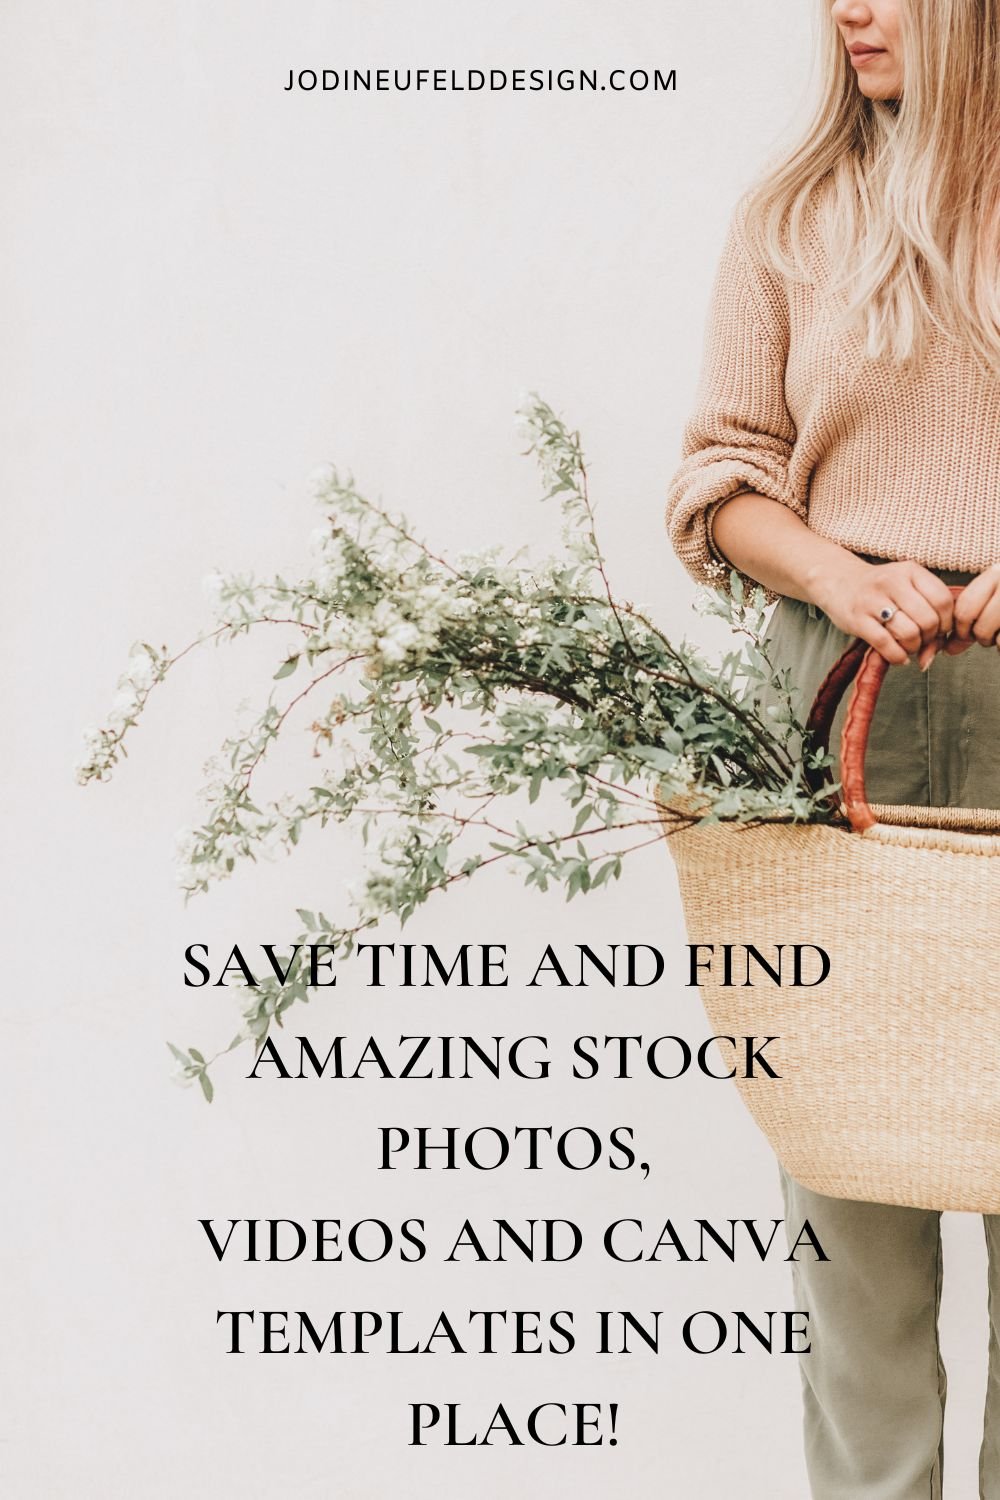 Where to find amazing stock photos, videos and Canva templates all in one place! | Jodi Neufeld Design | PIN 2.jpg